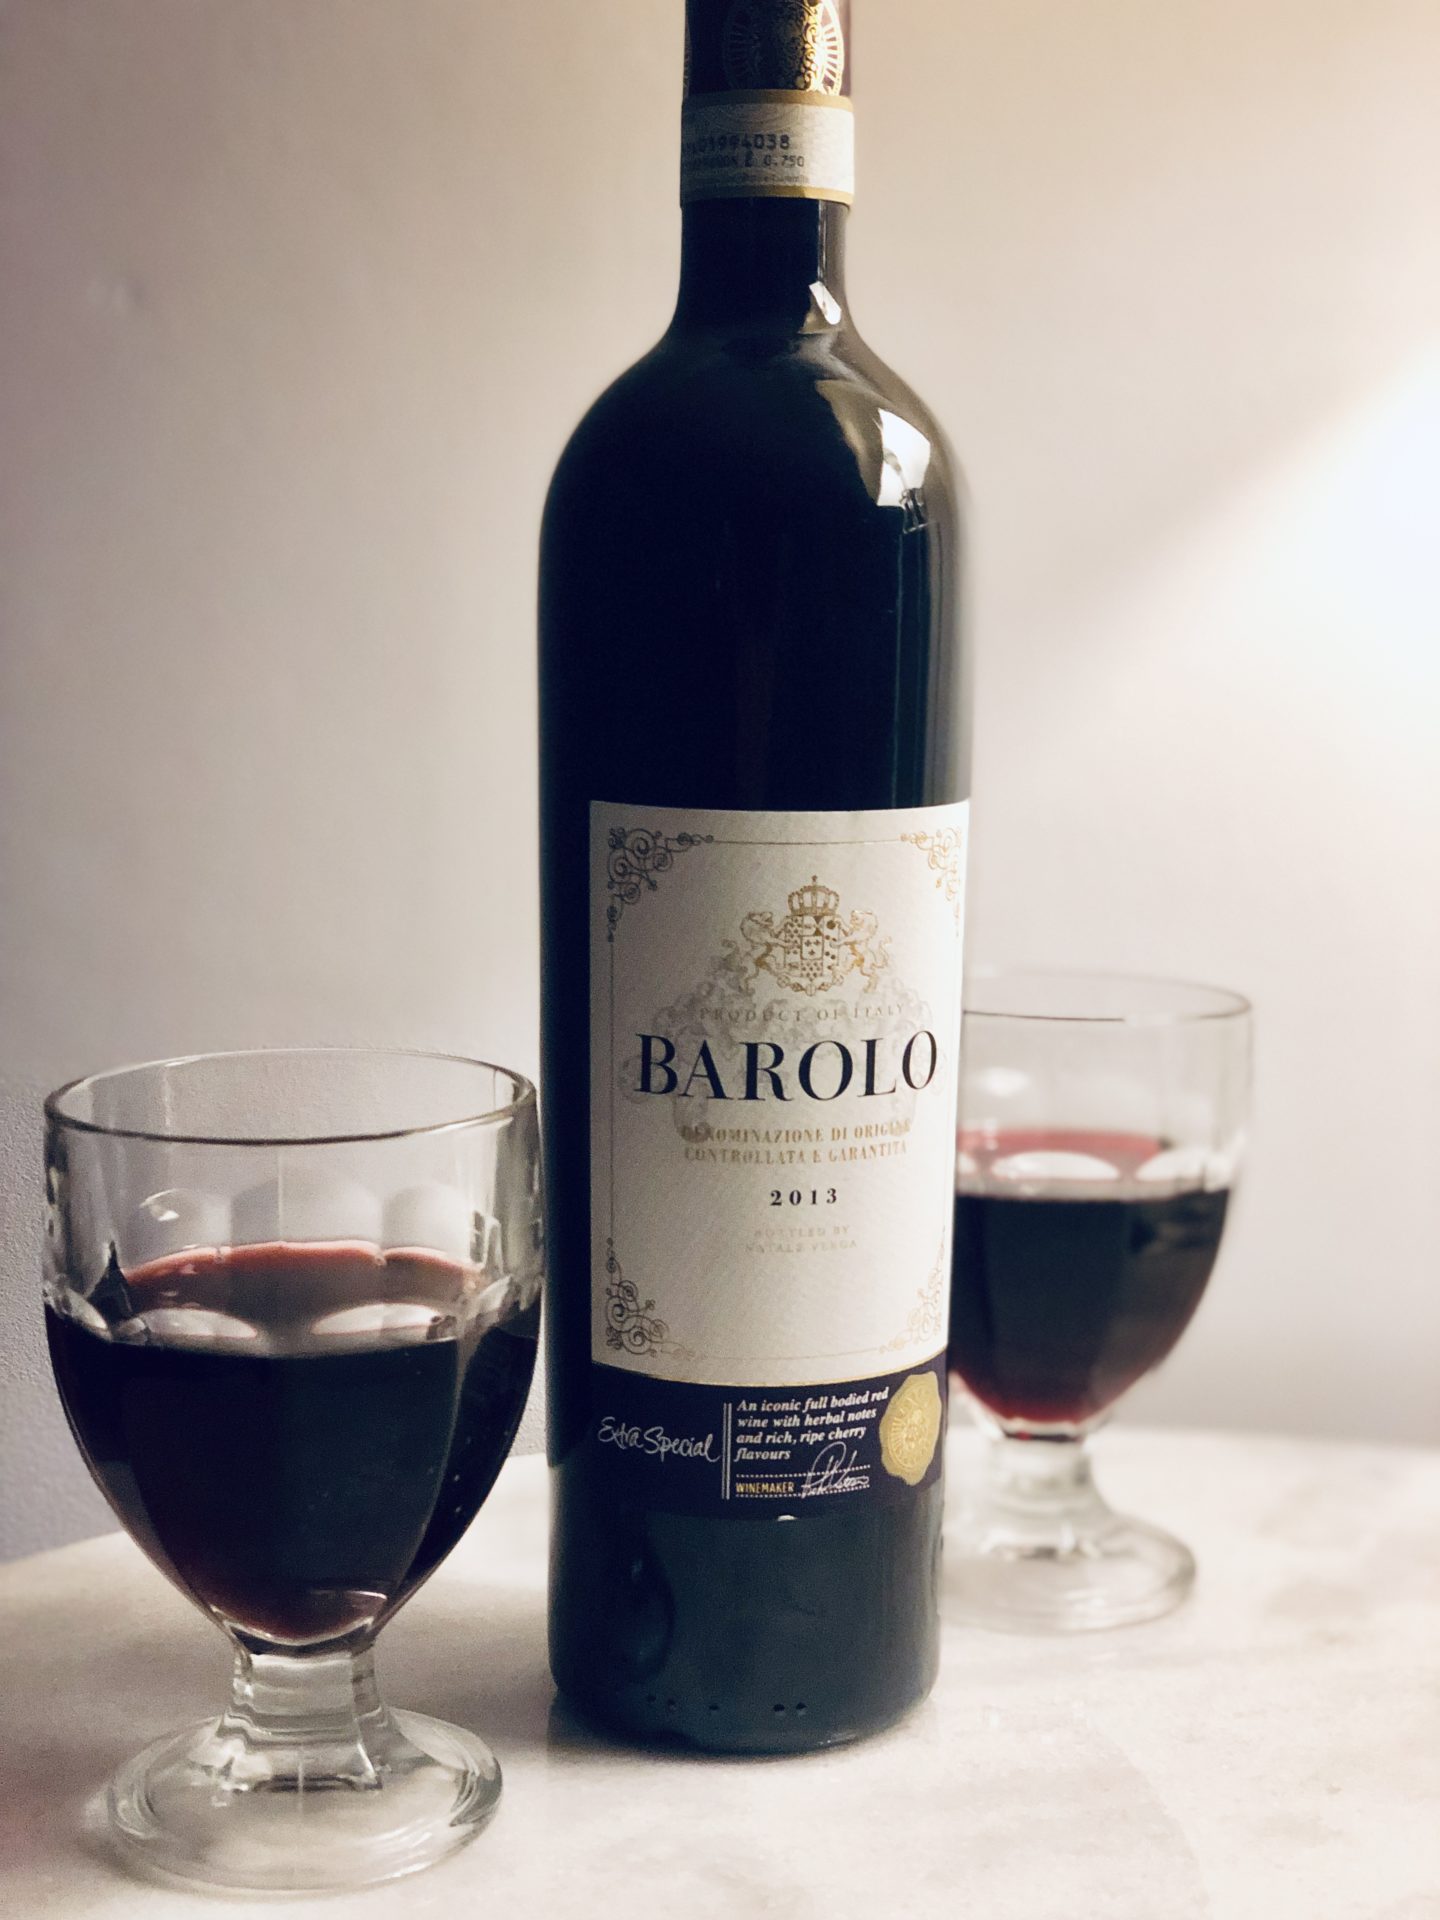 wines for winter with Asda : Barolo